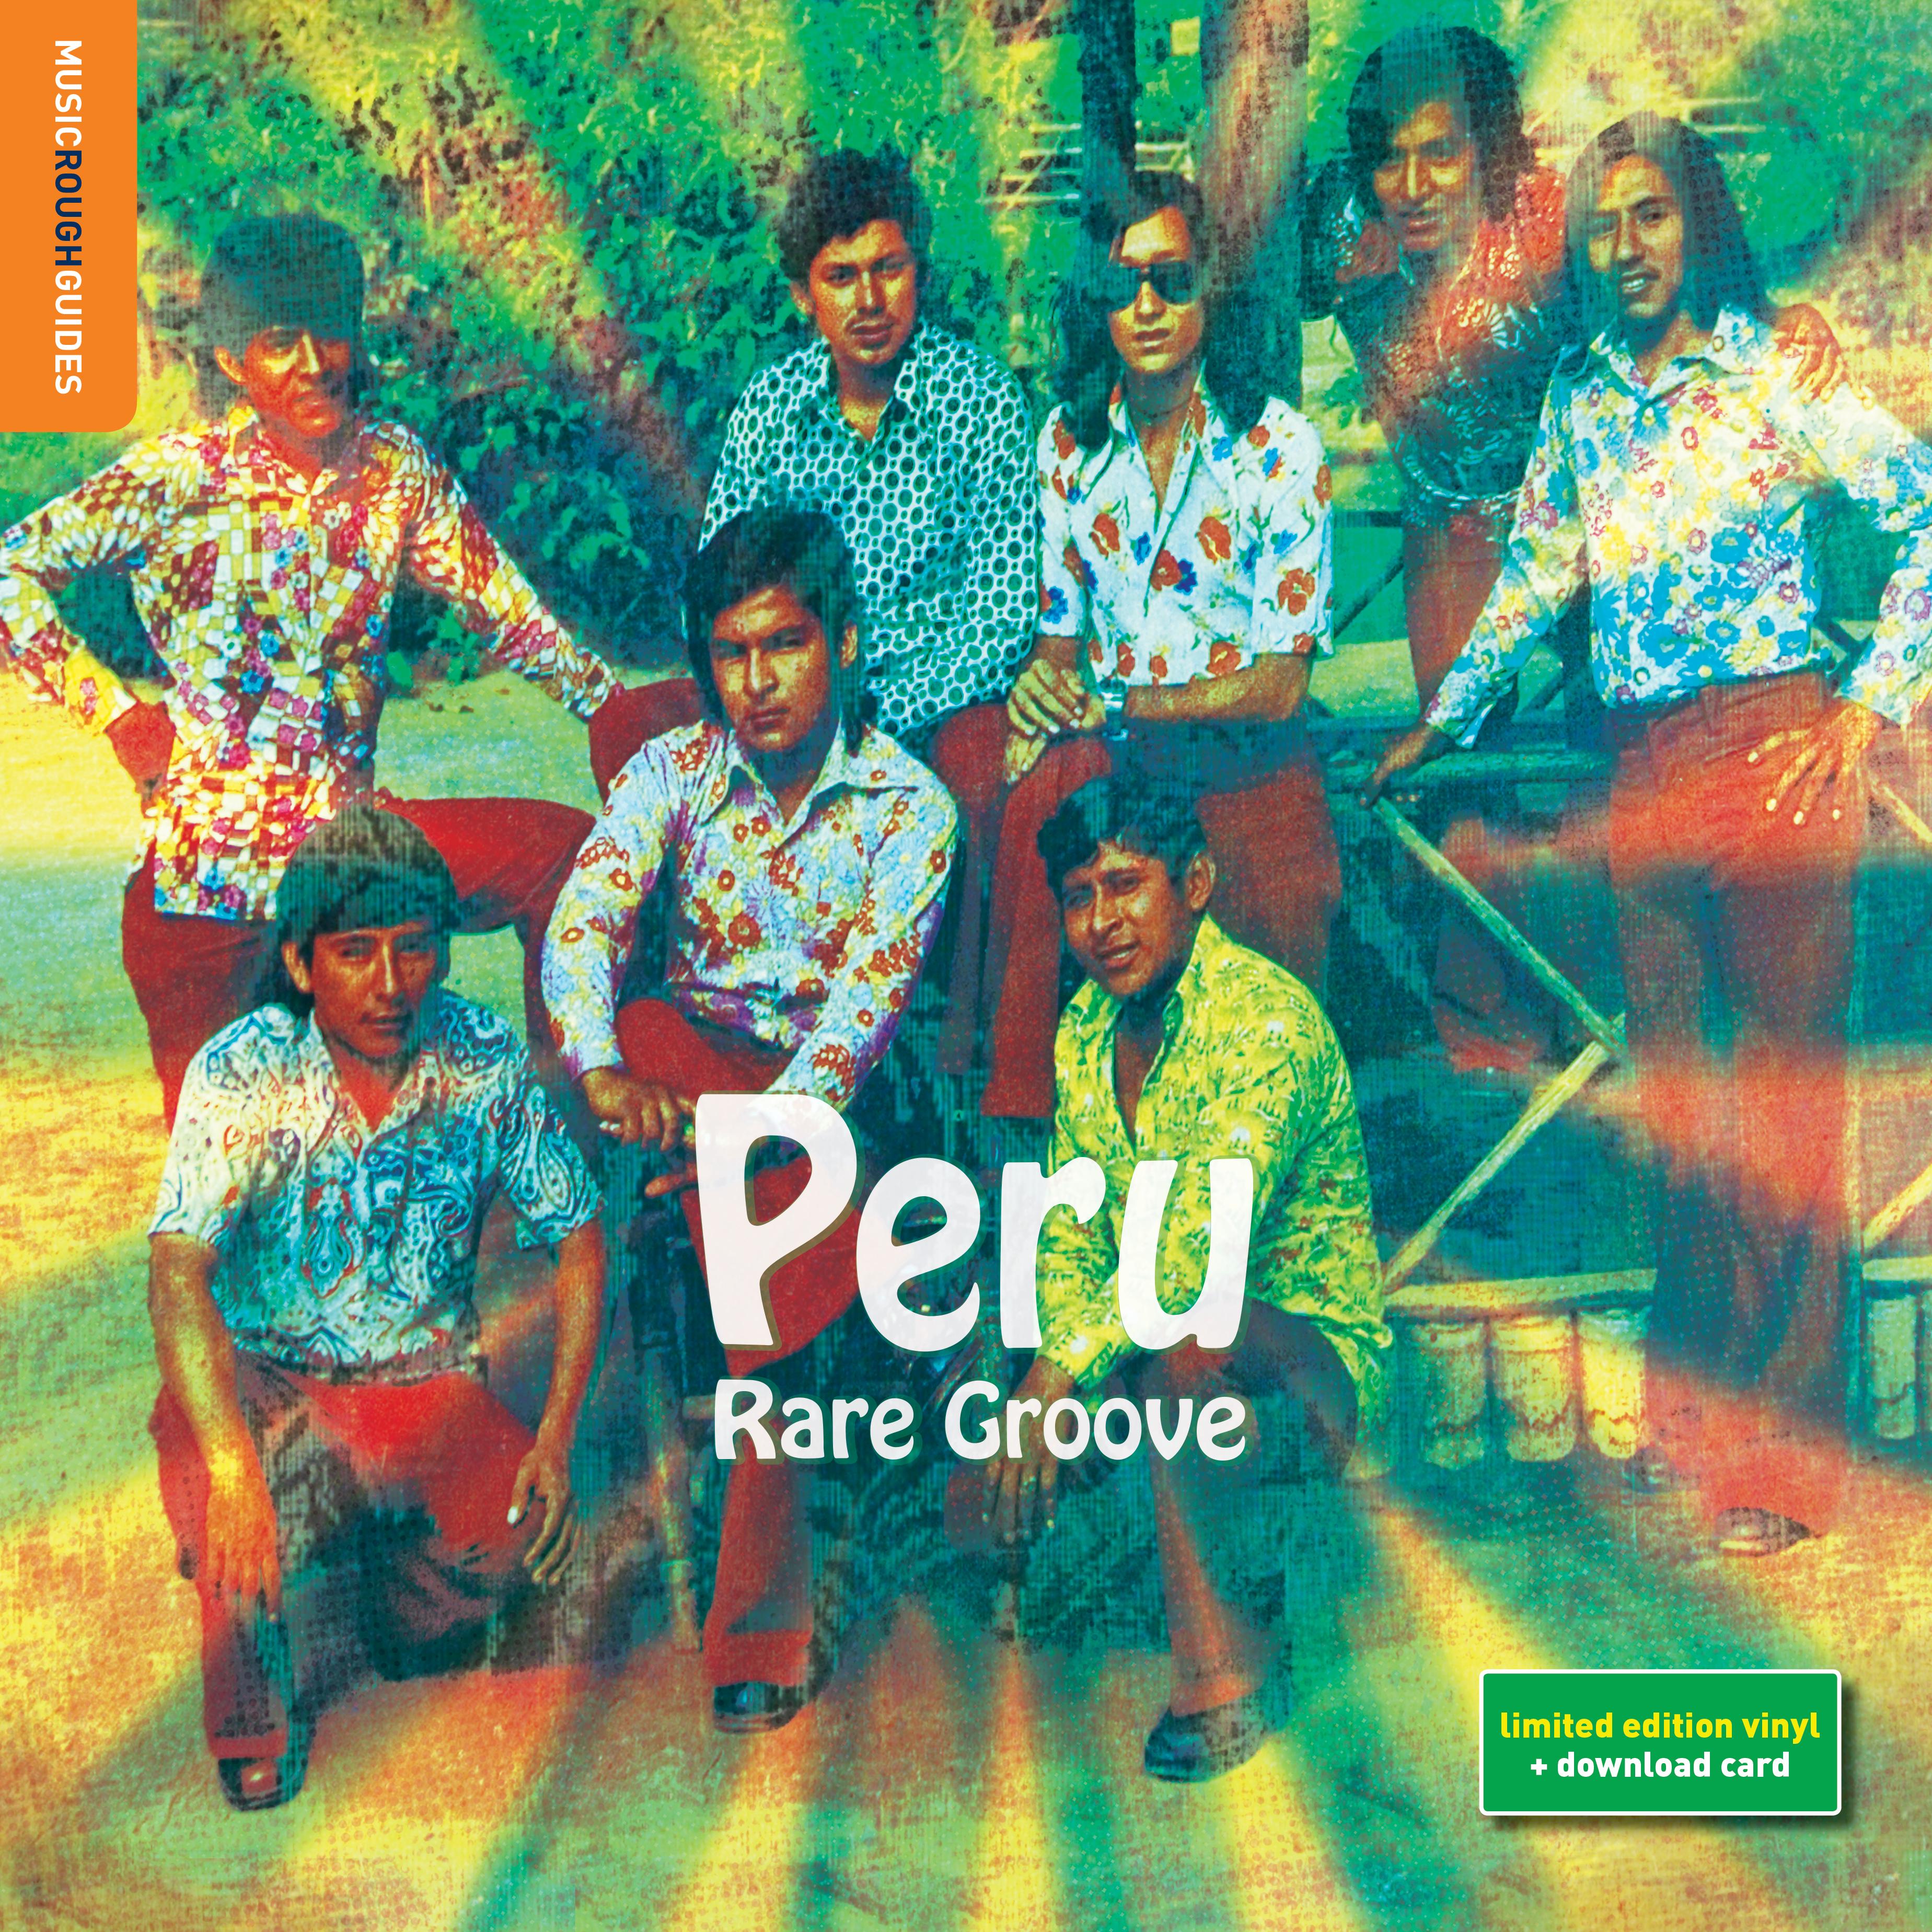 THE ROUGH GUIDE TO PERU RARE GROOVE [LP]